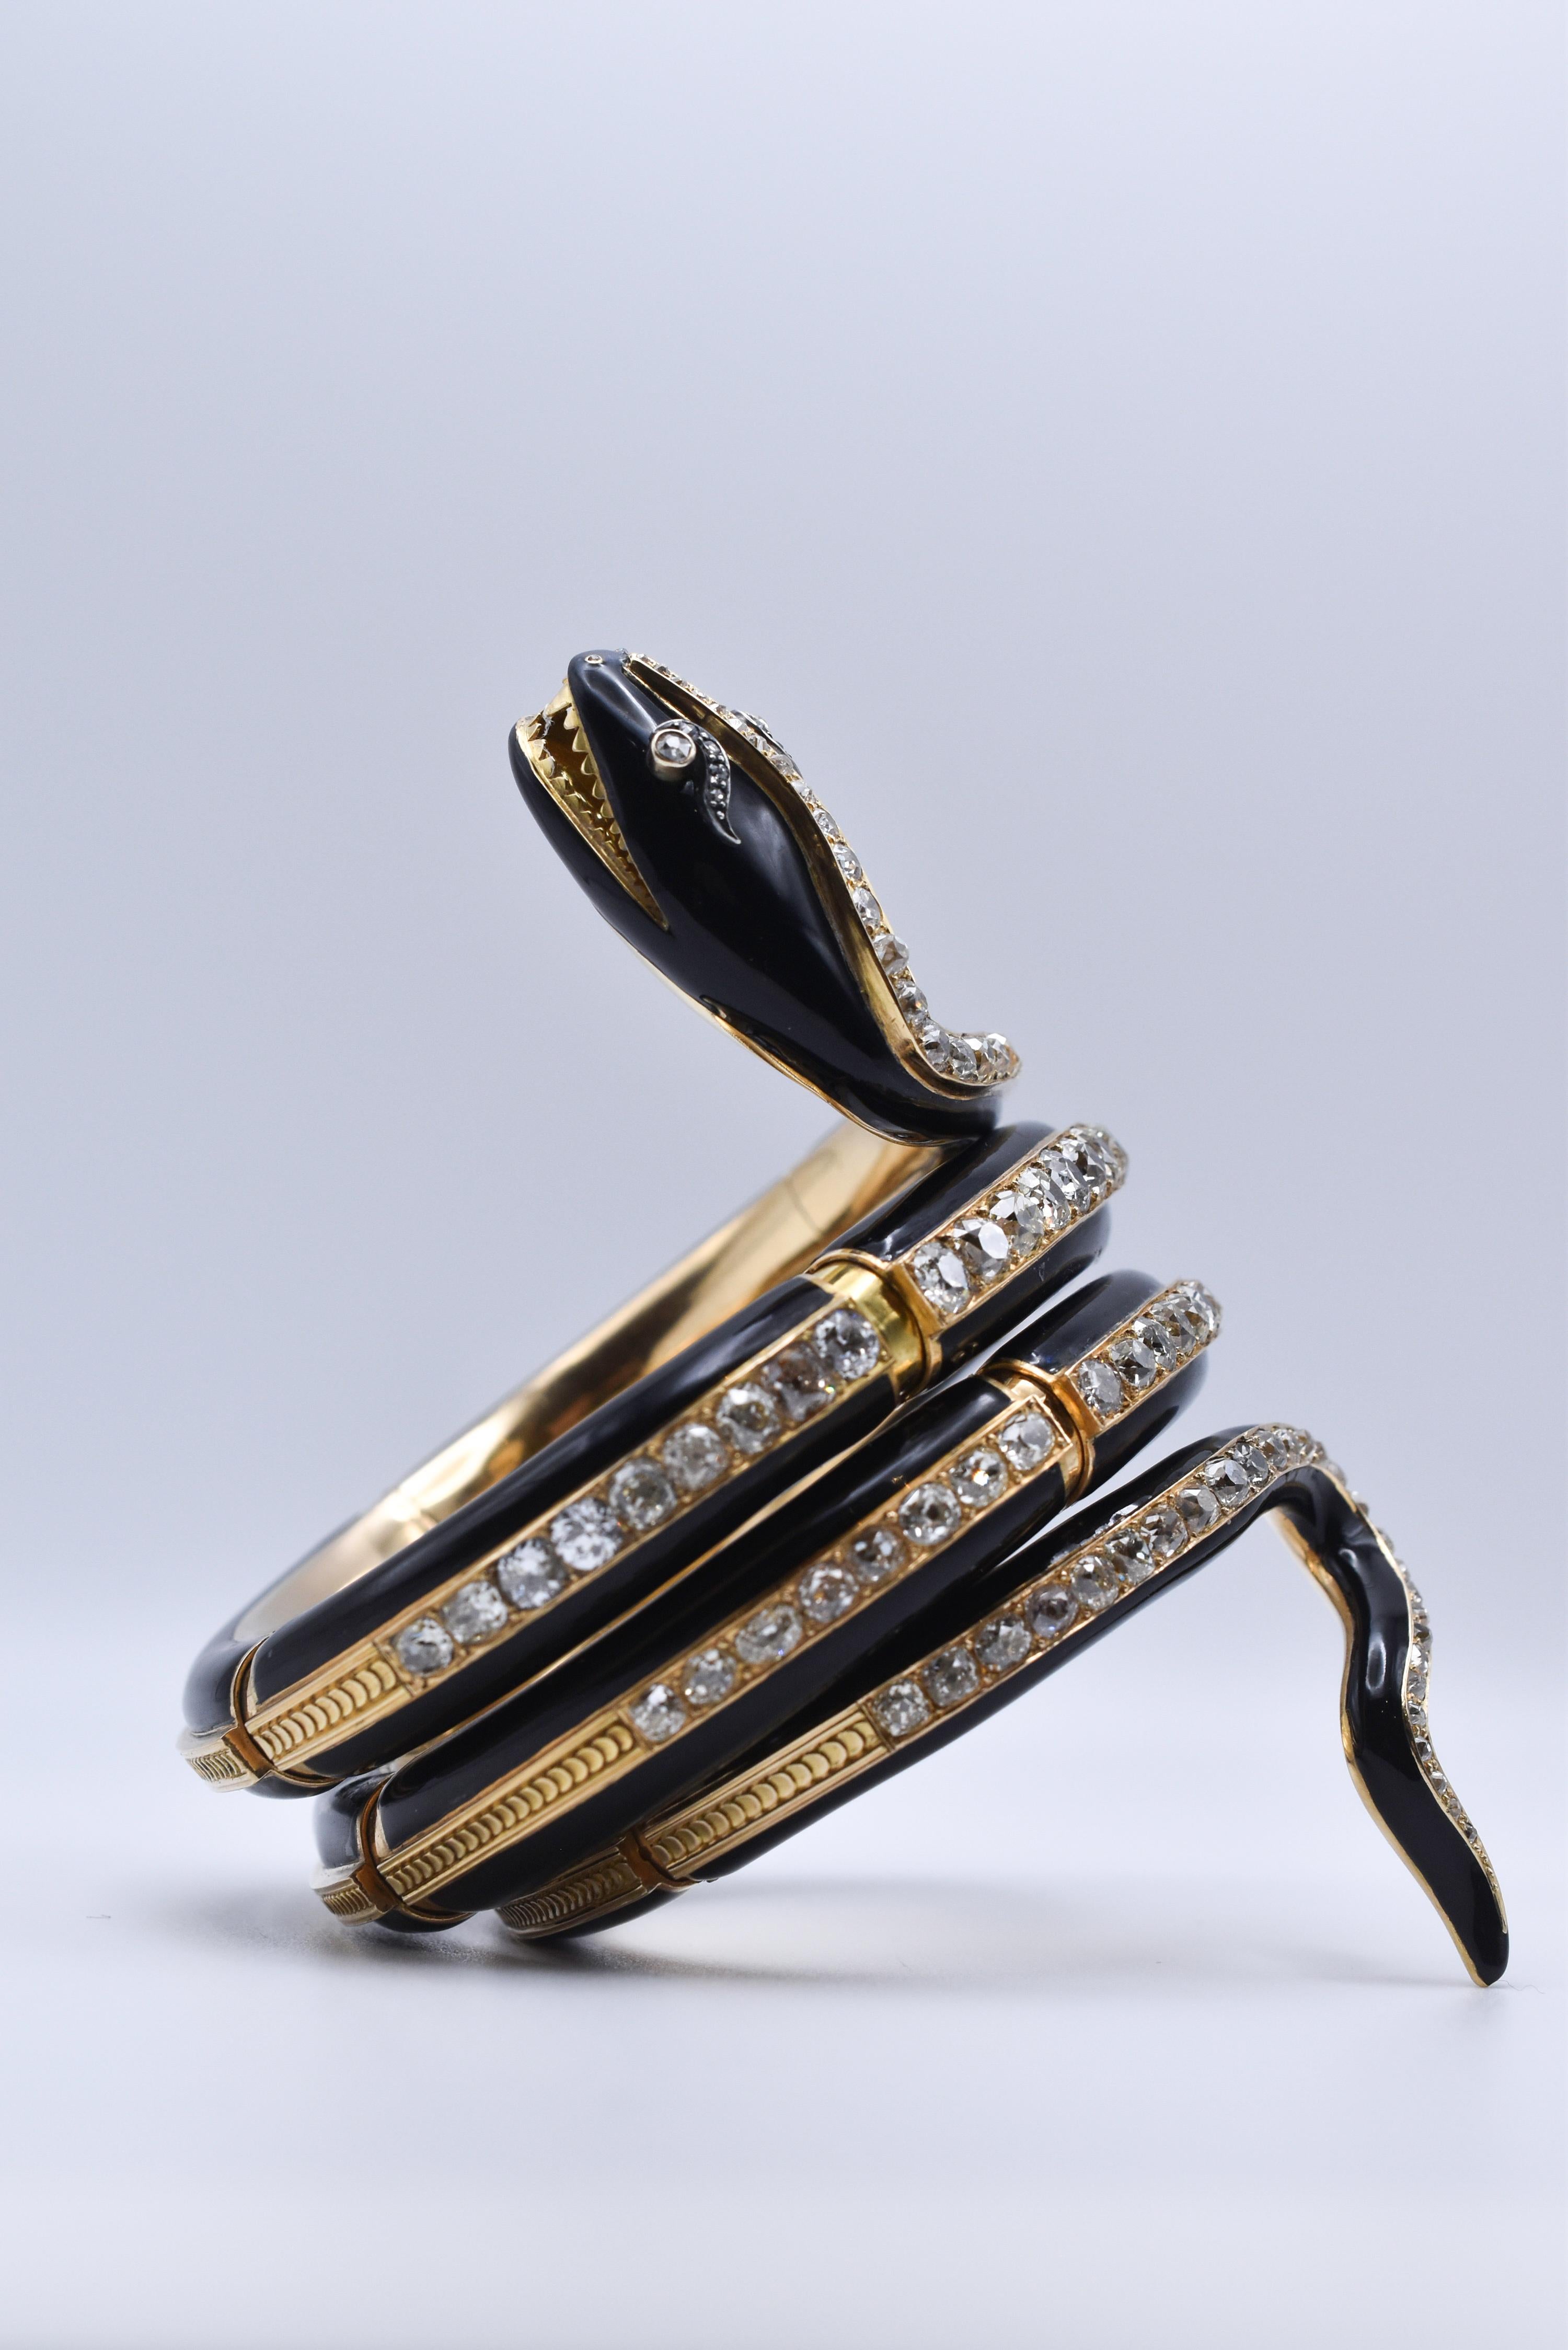 A fine Antique Snake Bracelet dating back to the Victorian era, crafted in 18k yellow gold with black enamel design, showcasing 28 carats of Old Mine Cut Diamonds. Made in Italy, circa 1880.
